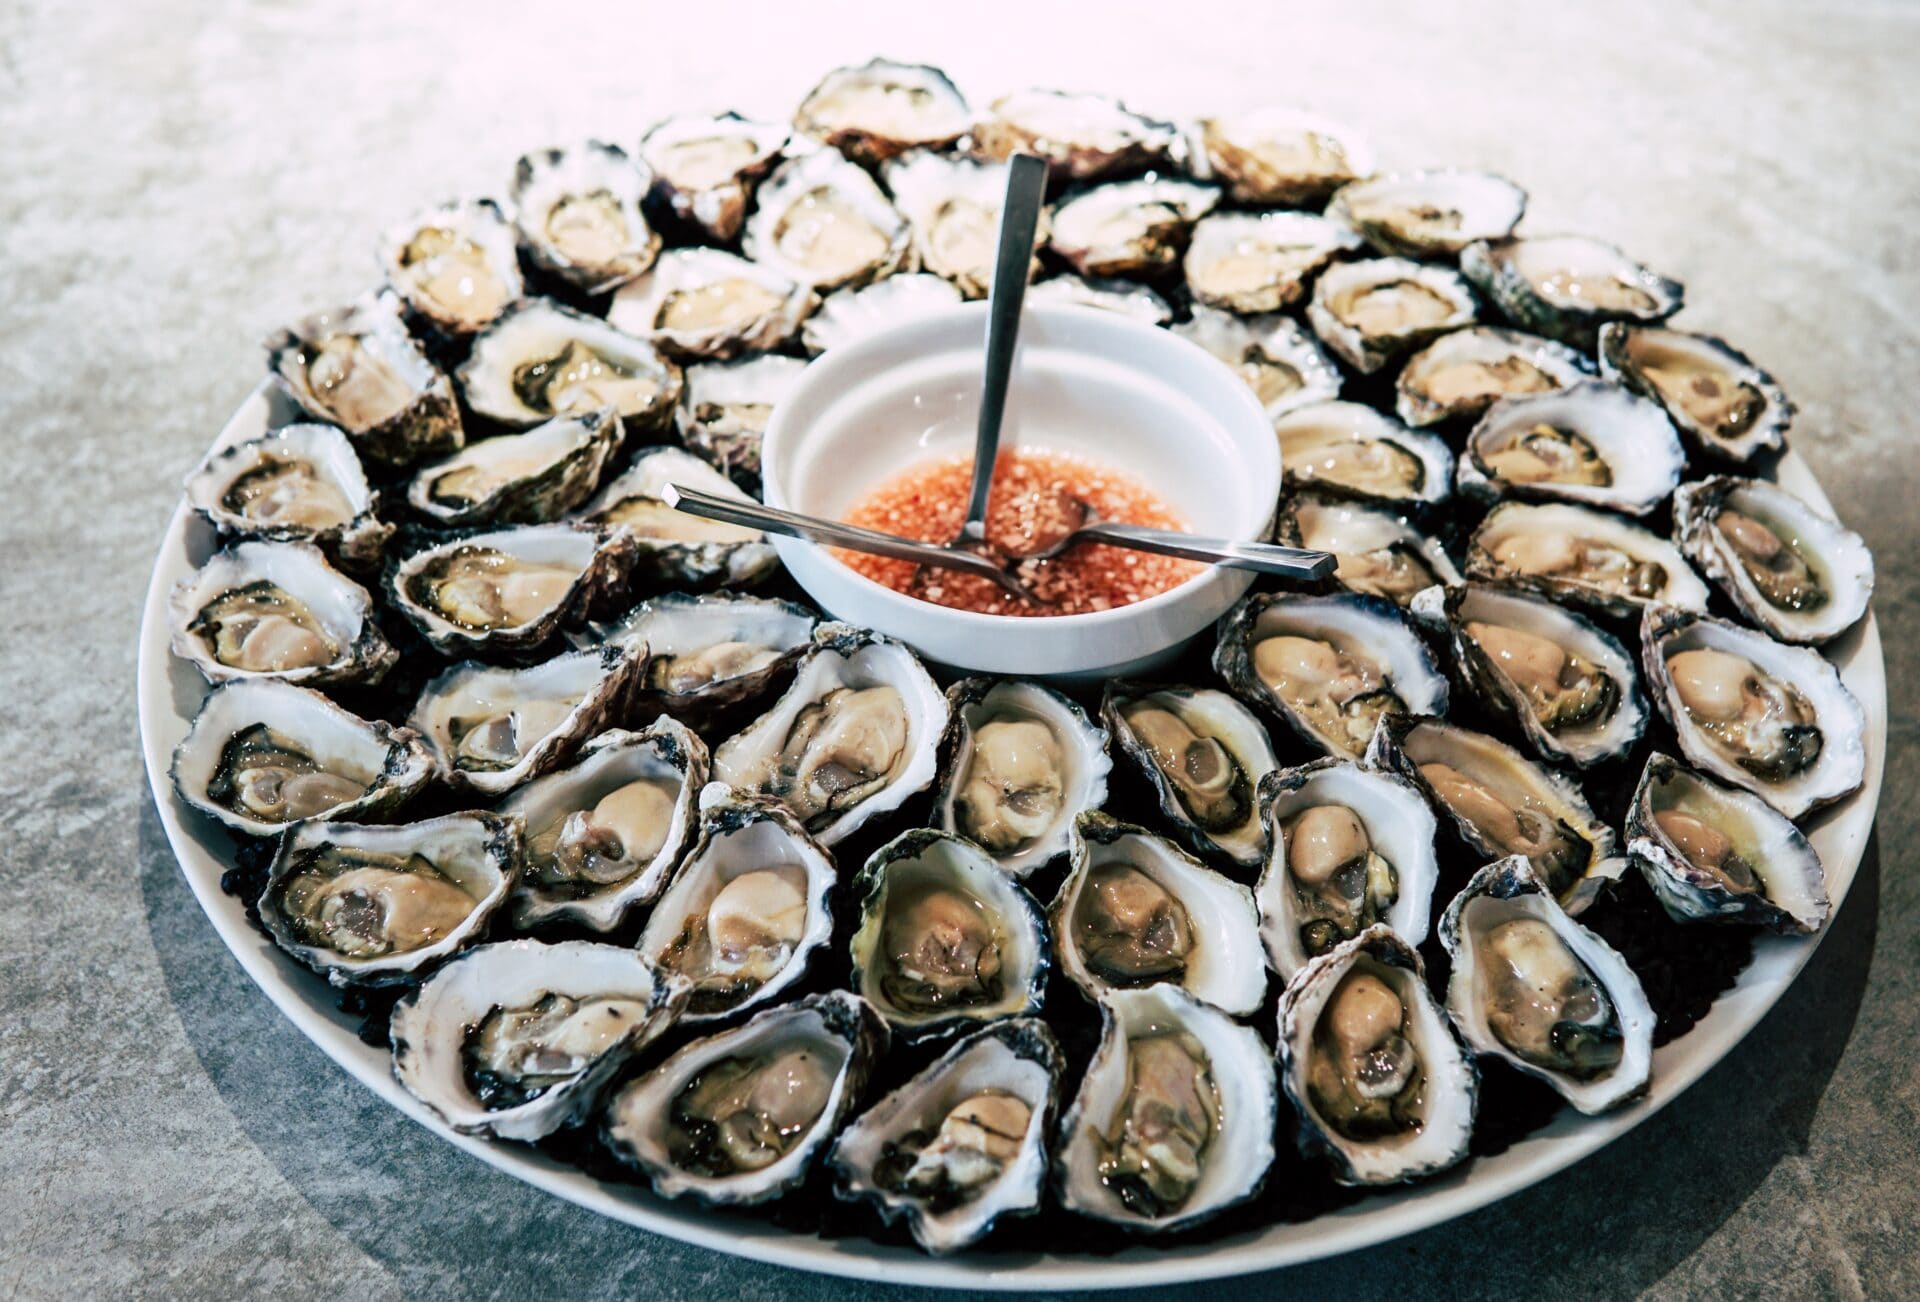 Bluff oysters on a massive plate with vinaigrette